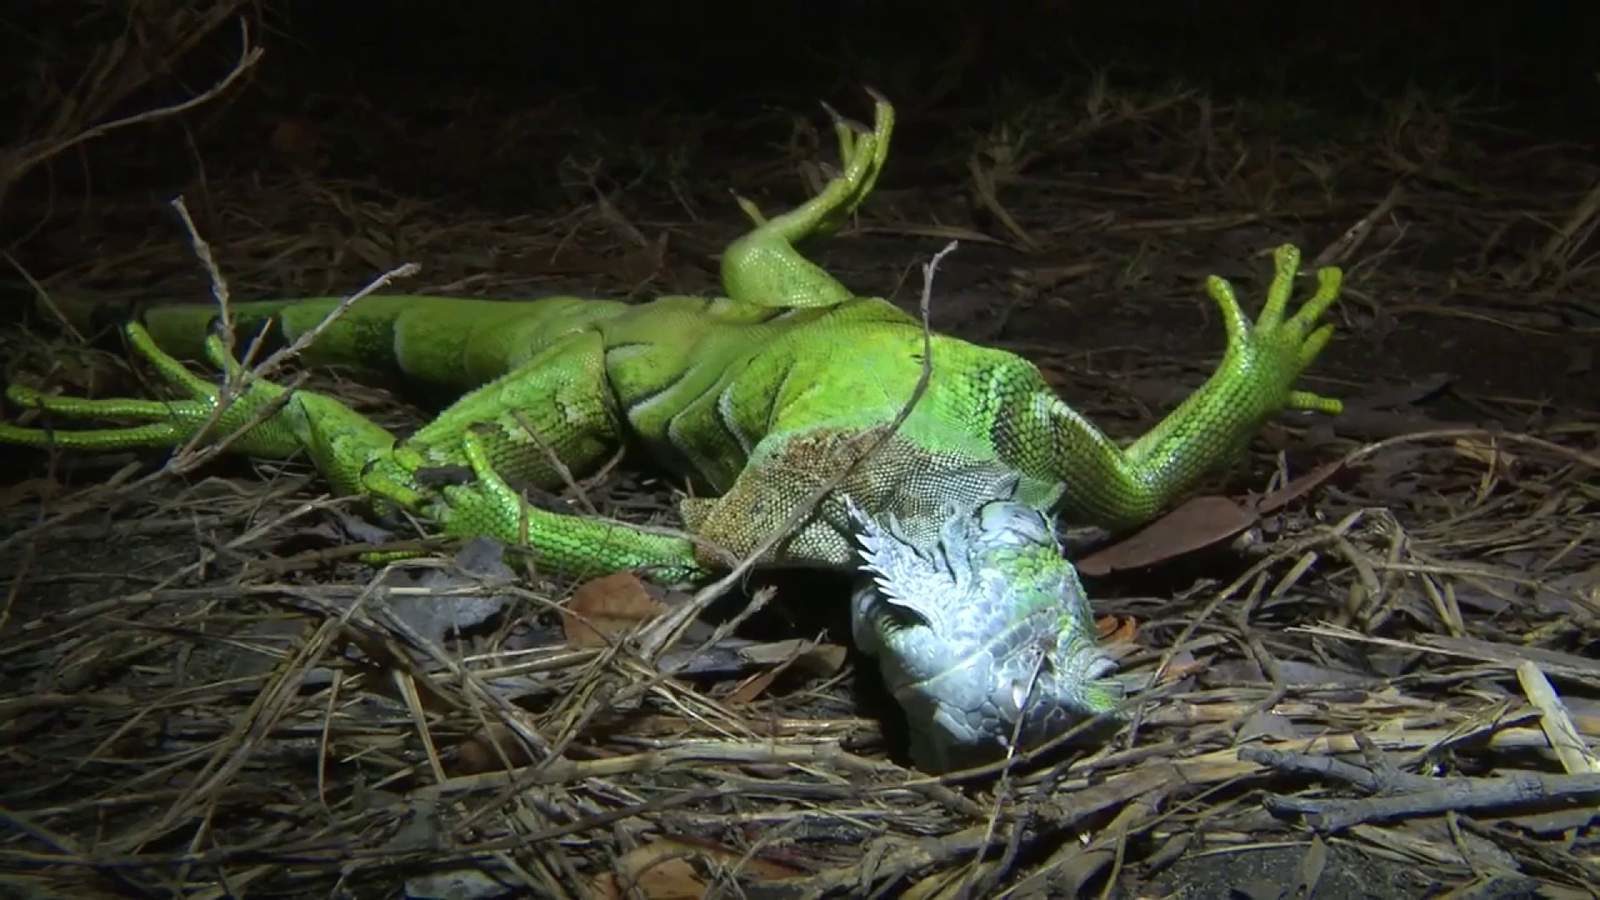 Frozen iguanas falling from trees in South Florida